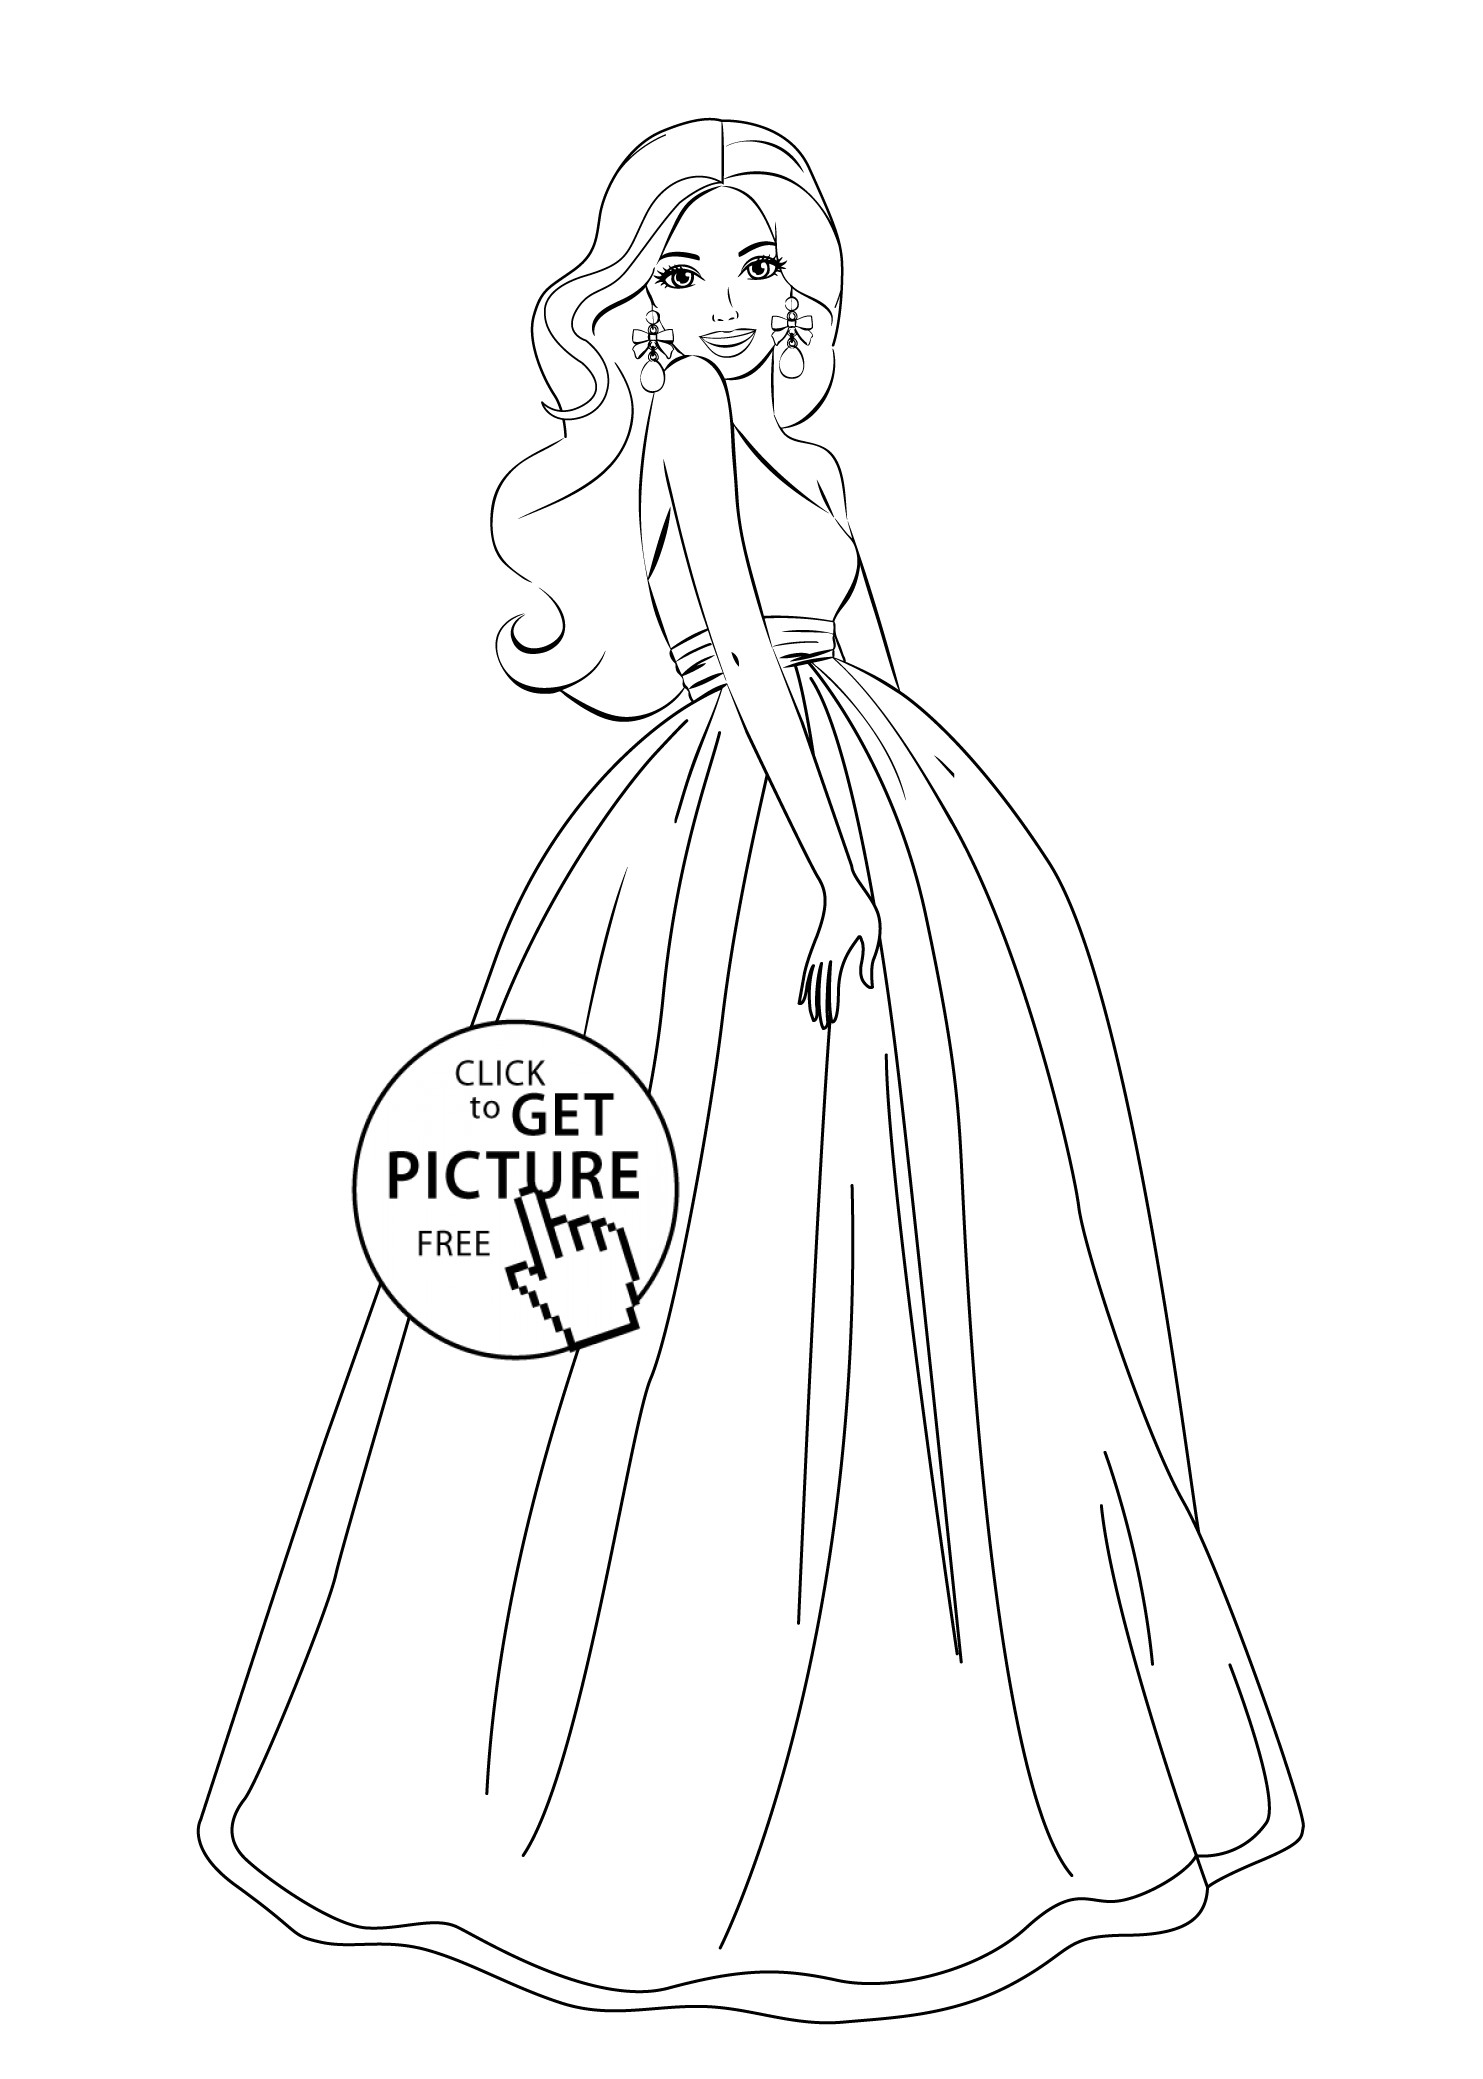 Free Coloring Pages Girls Printable
 Barbie coloring pages for girls free printable